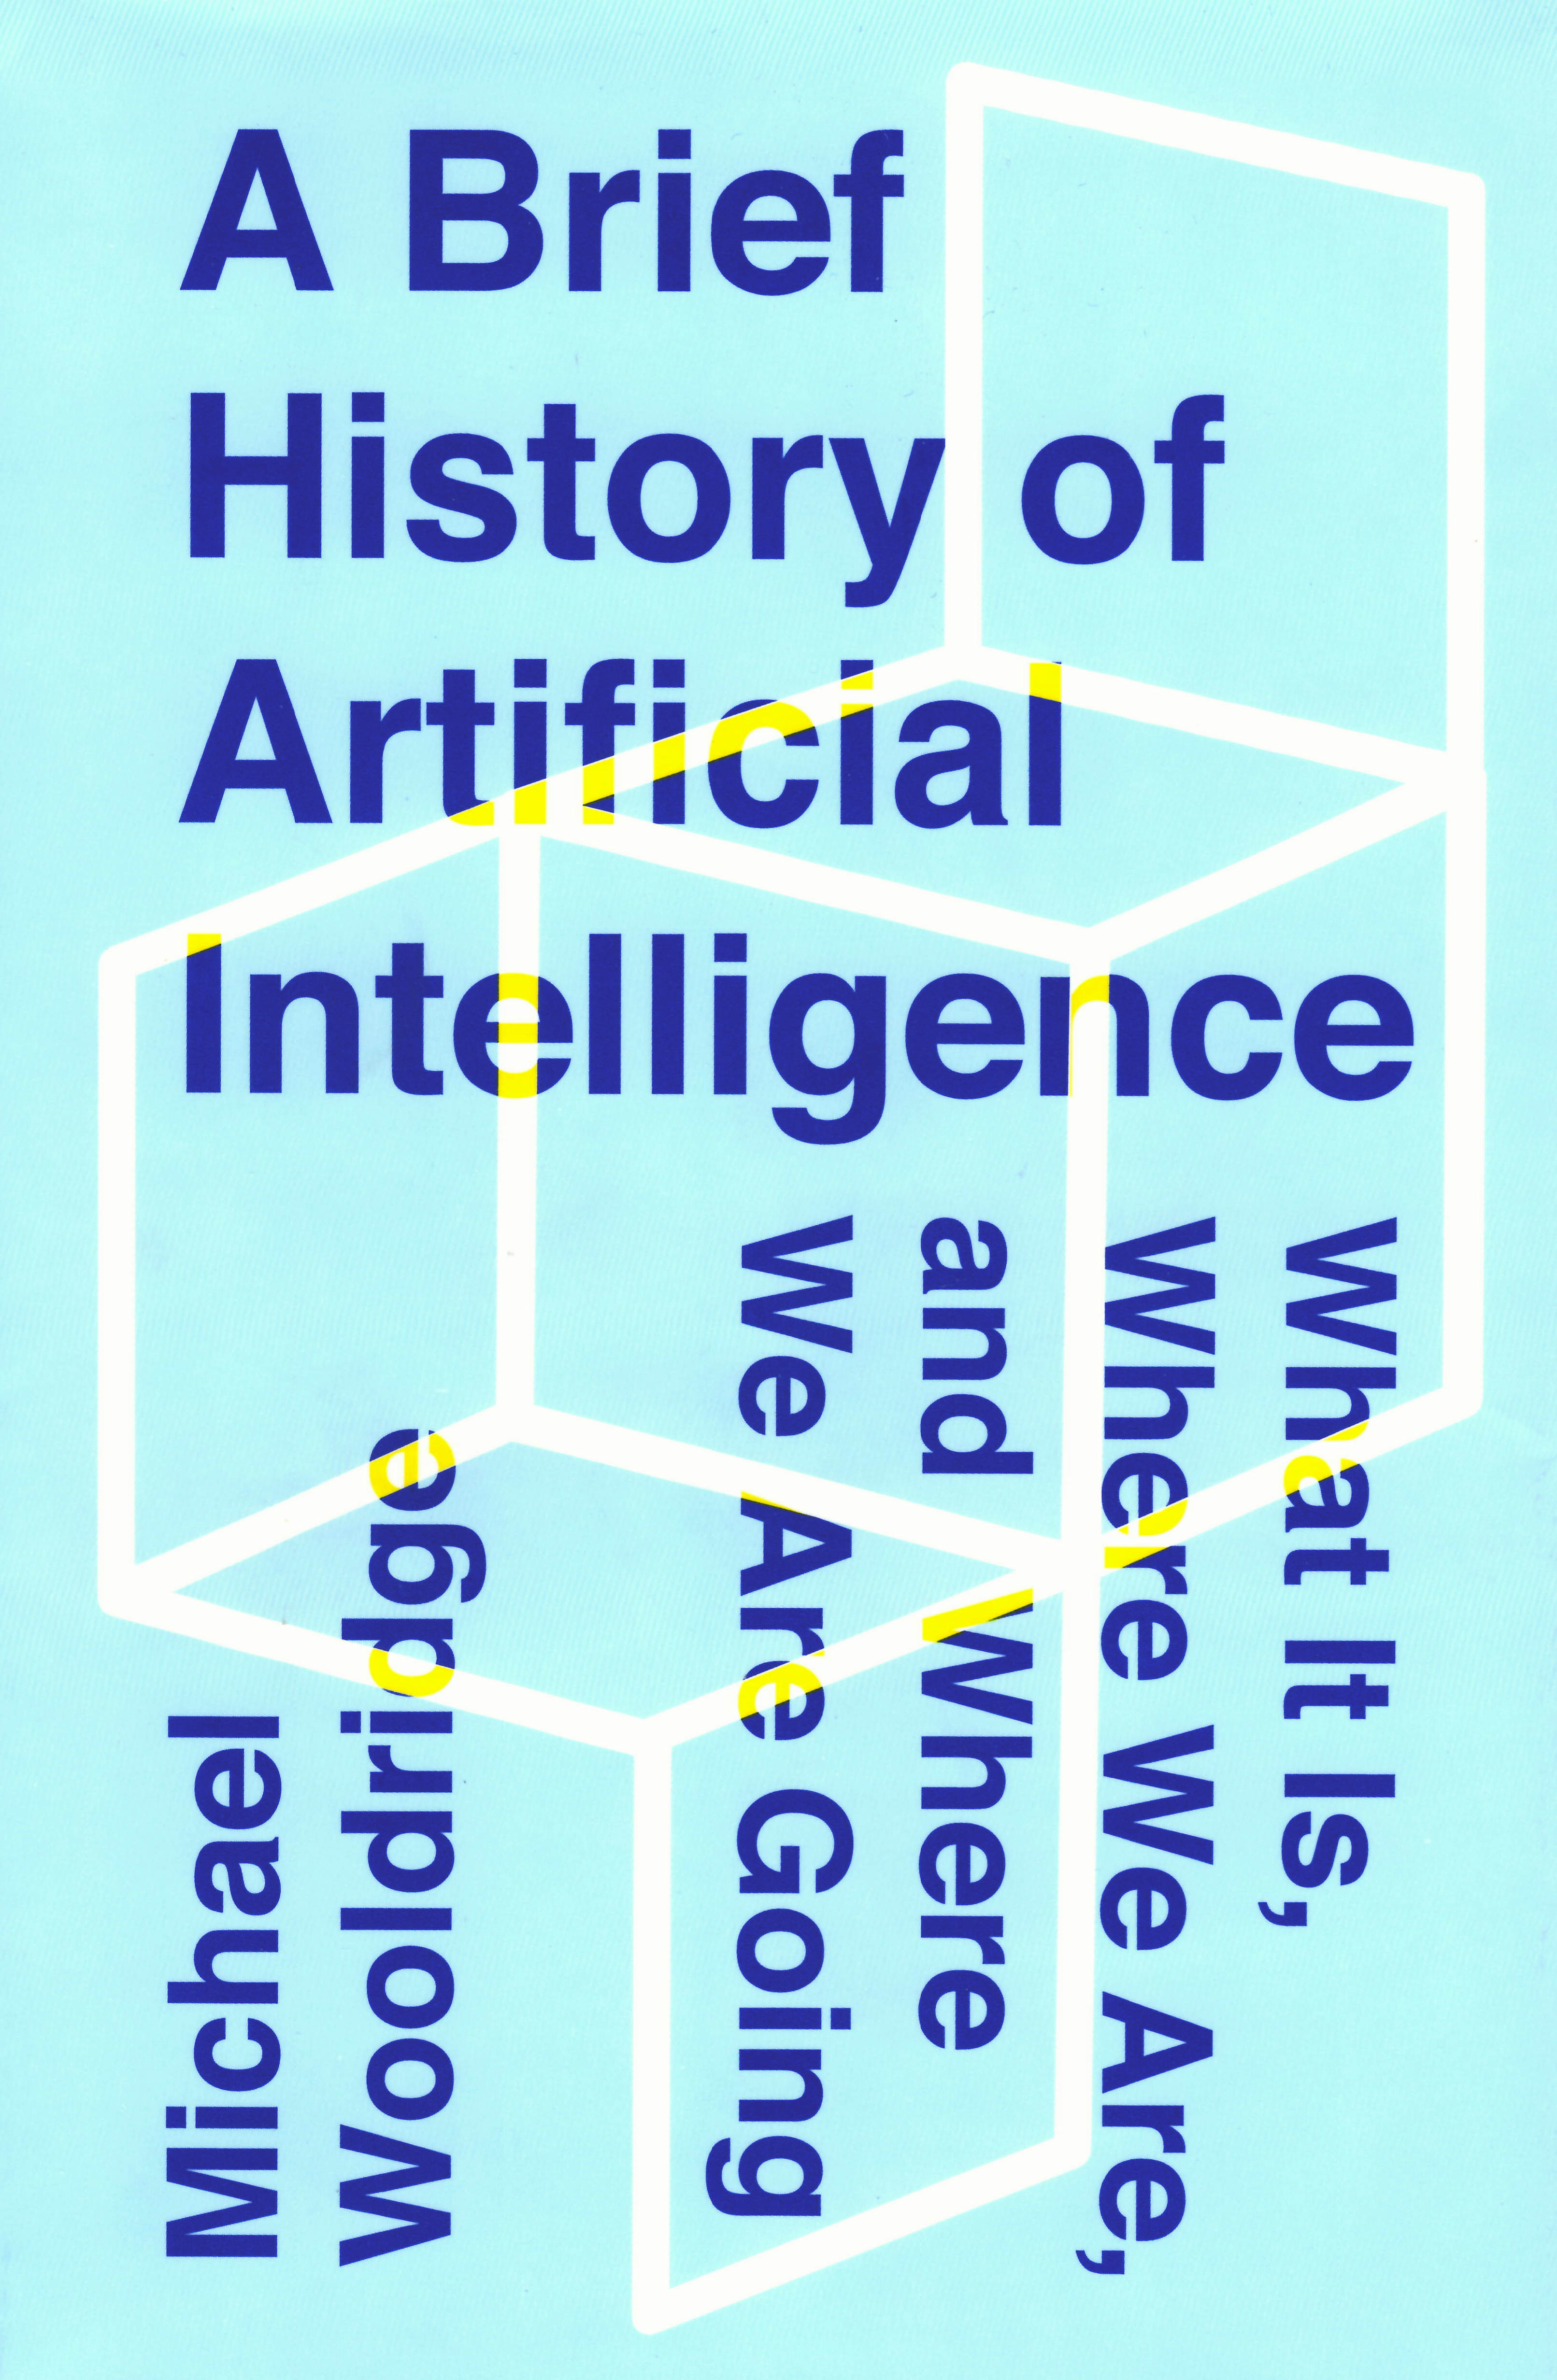 'A Brief History of Artificial Intelligence' by Michael Wooldridge